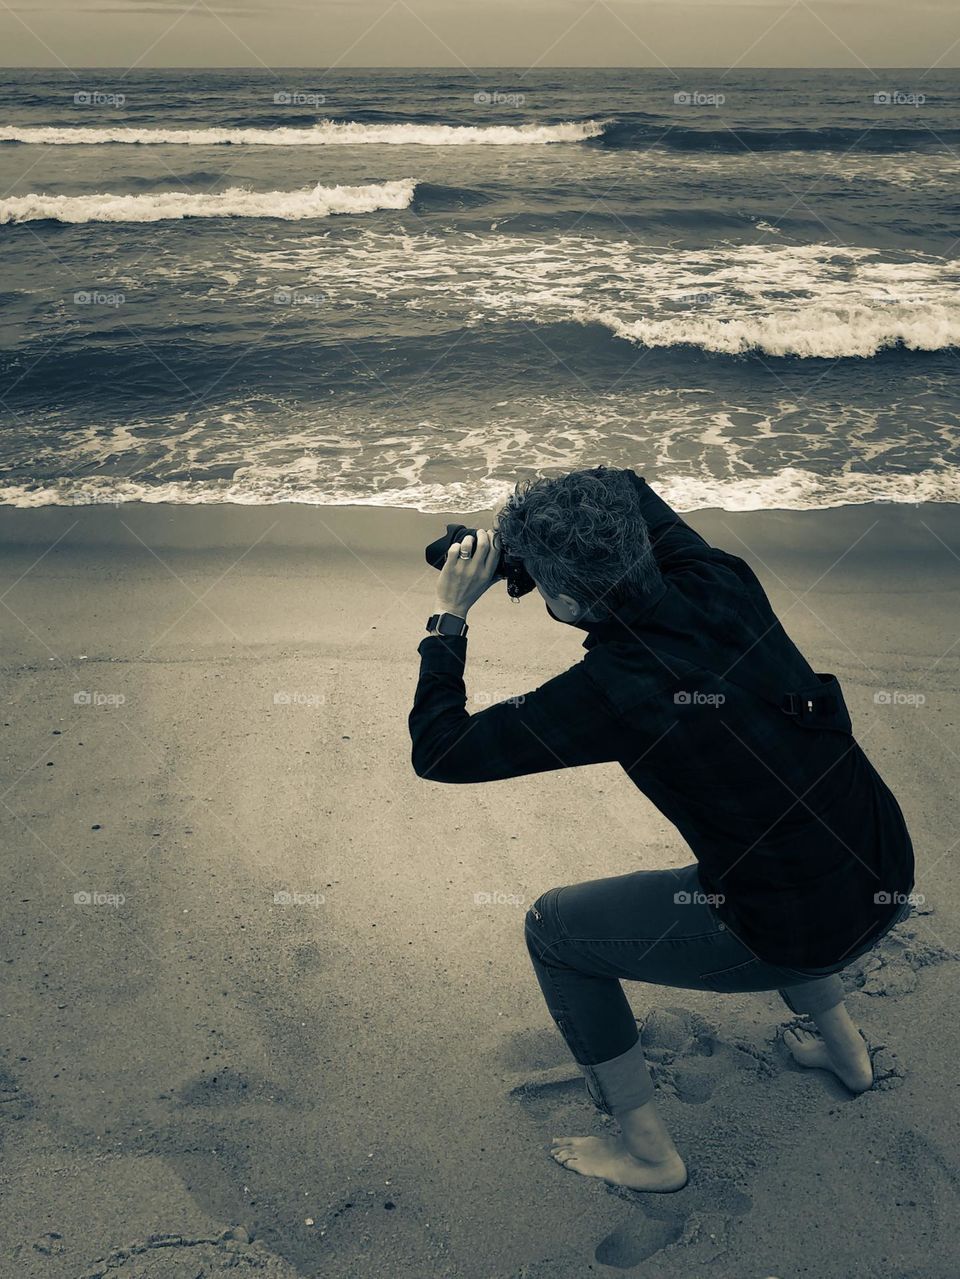 Photographer photographing the sea, photographer on the beach, photographer working on the beach, monochrome photo of the seaside, seaside vacations 